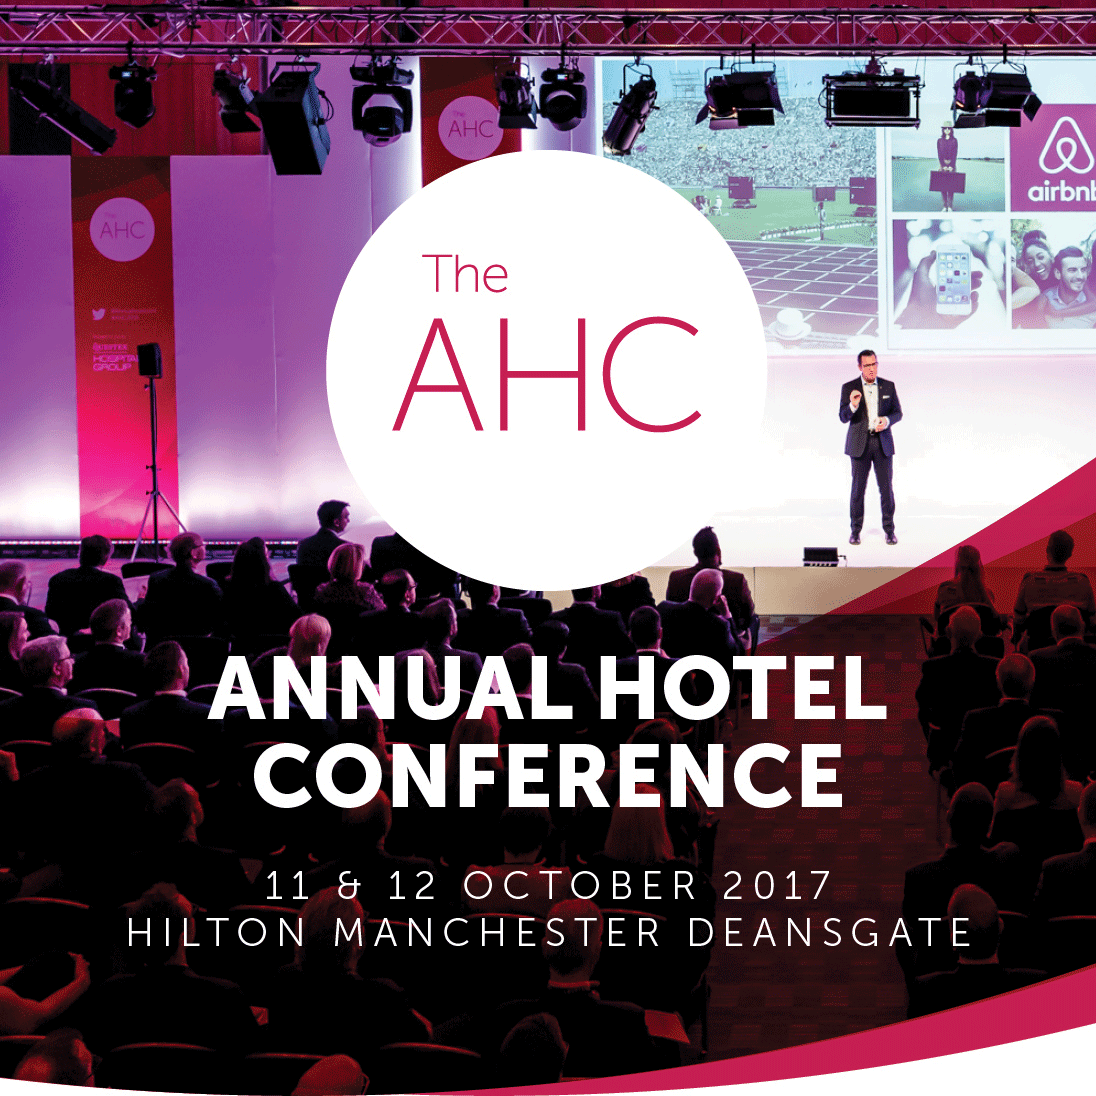 The 2017 Annual Hotel Conference is Oct 11-12 in Manchester